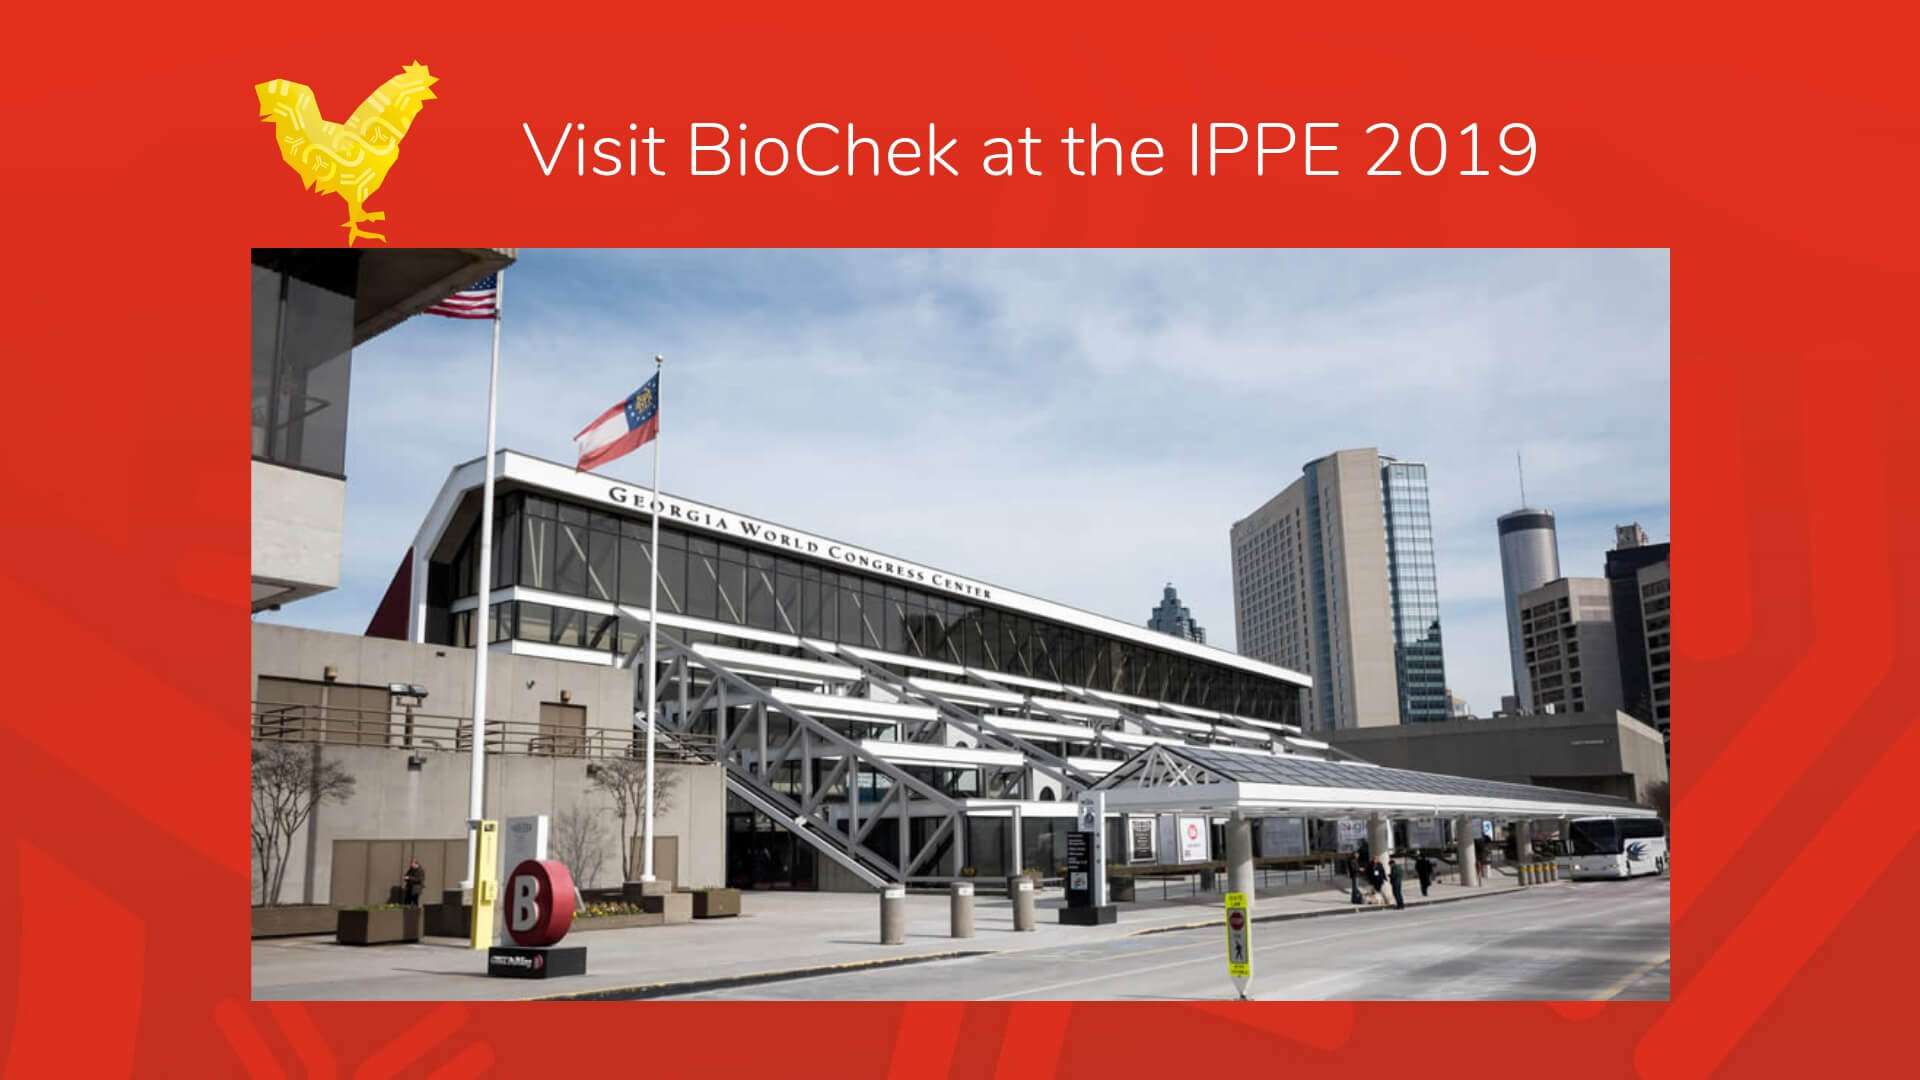 BioChek was at the IPPE, February 12th – 14th